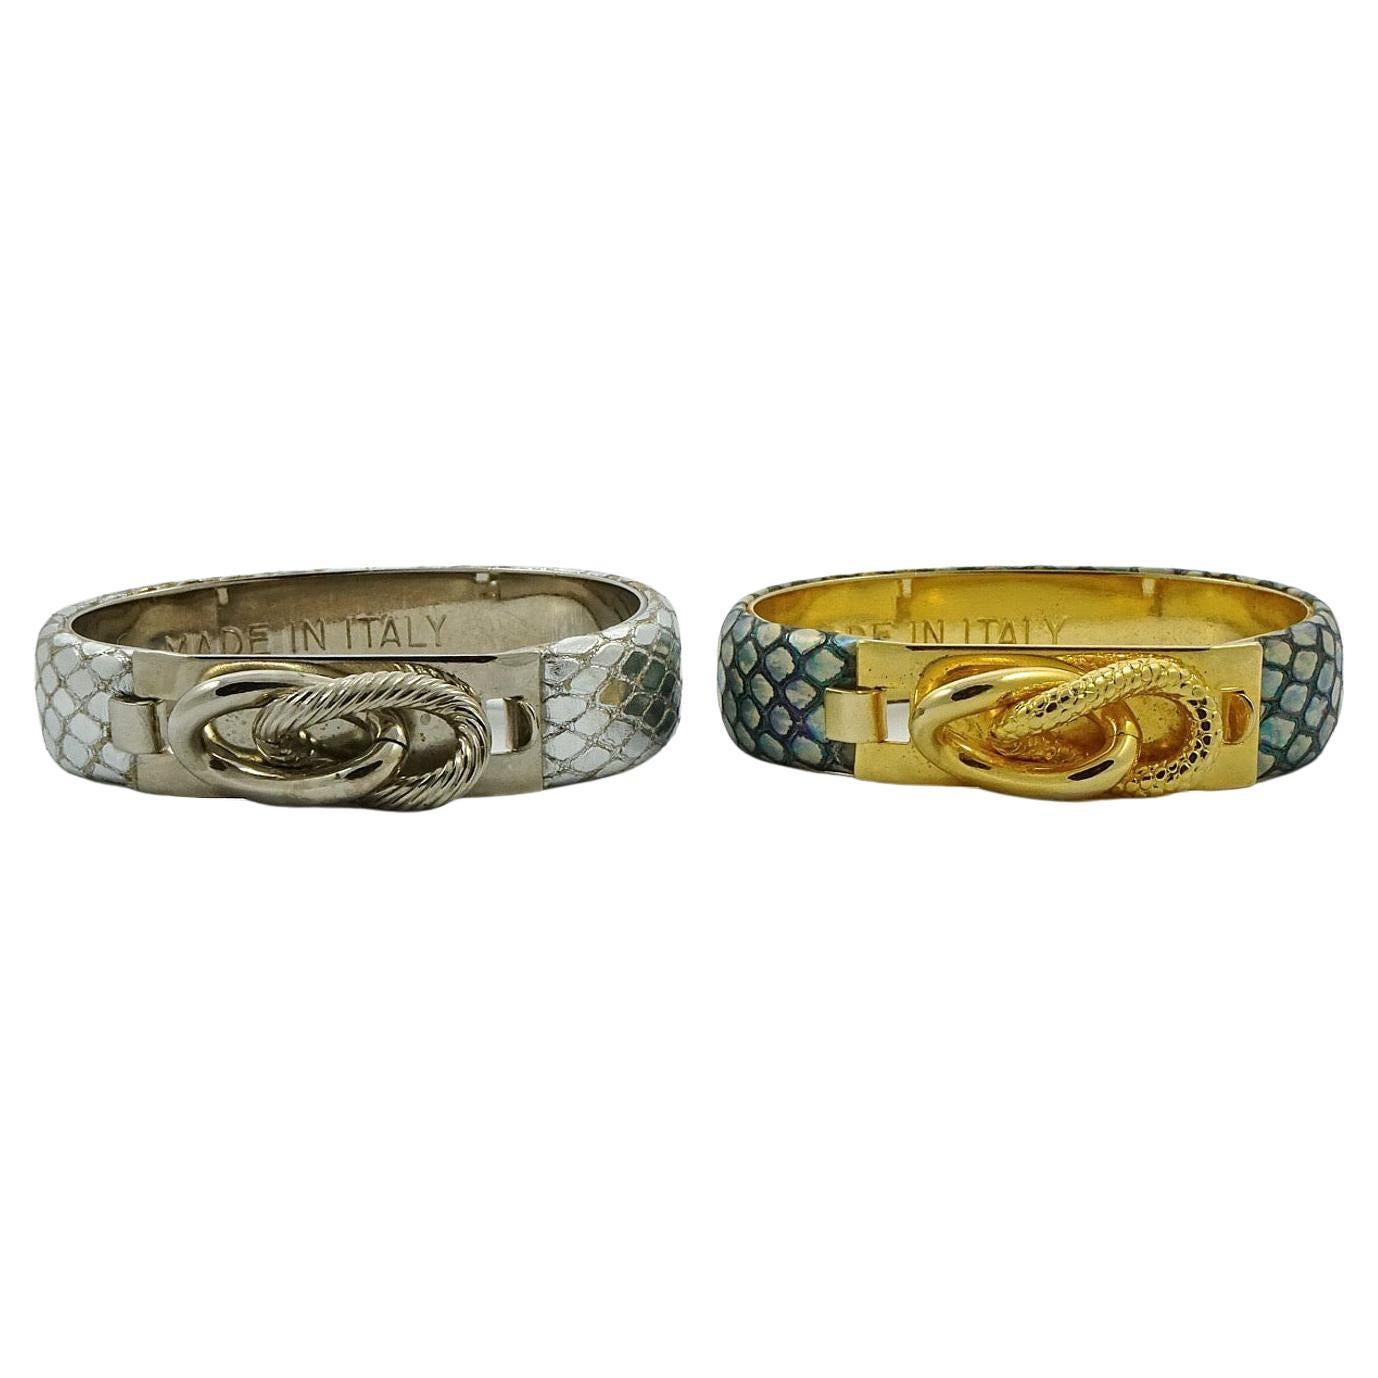 Pair of Silver and Grey Leather Lizard Design Bangle Bracelets Made in Italy